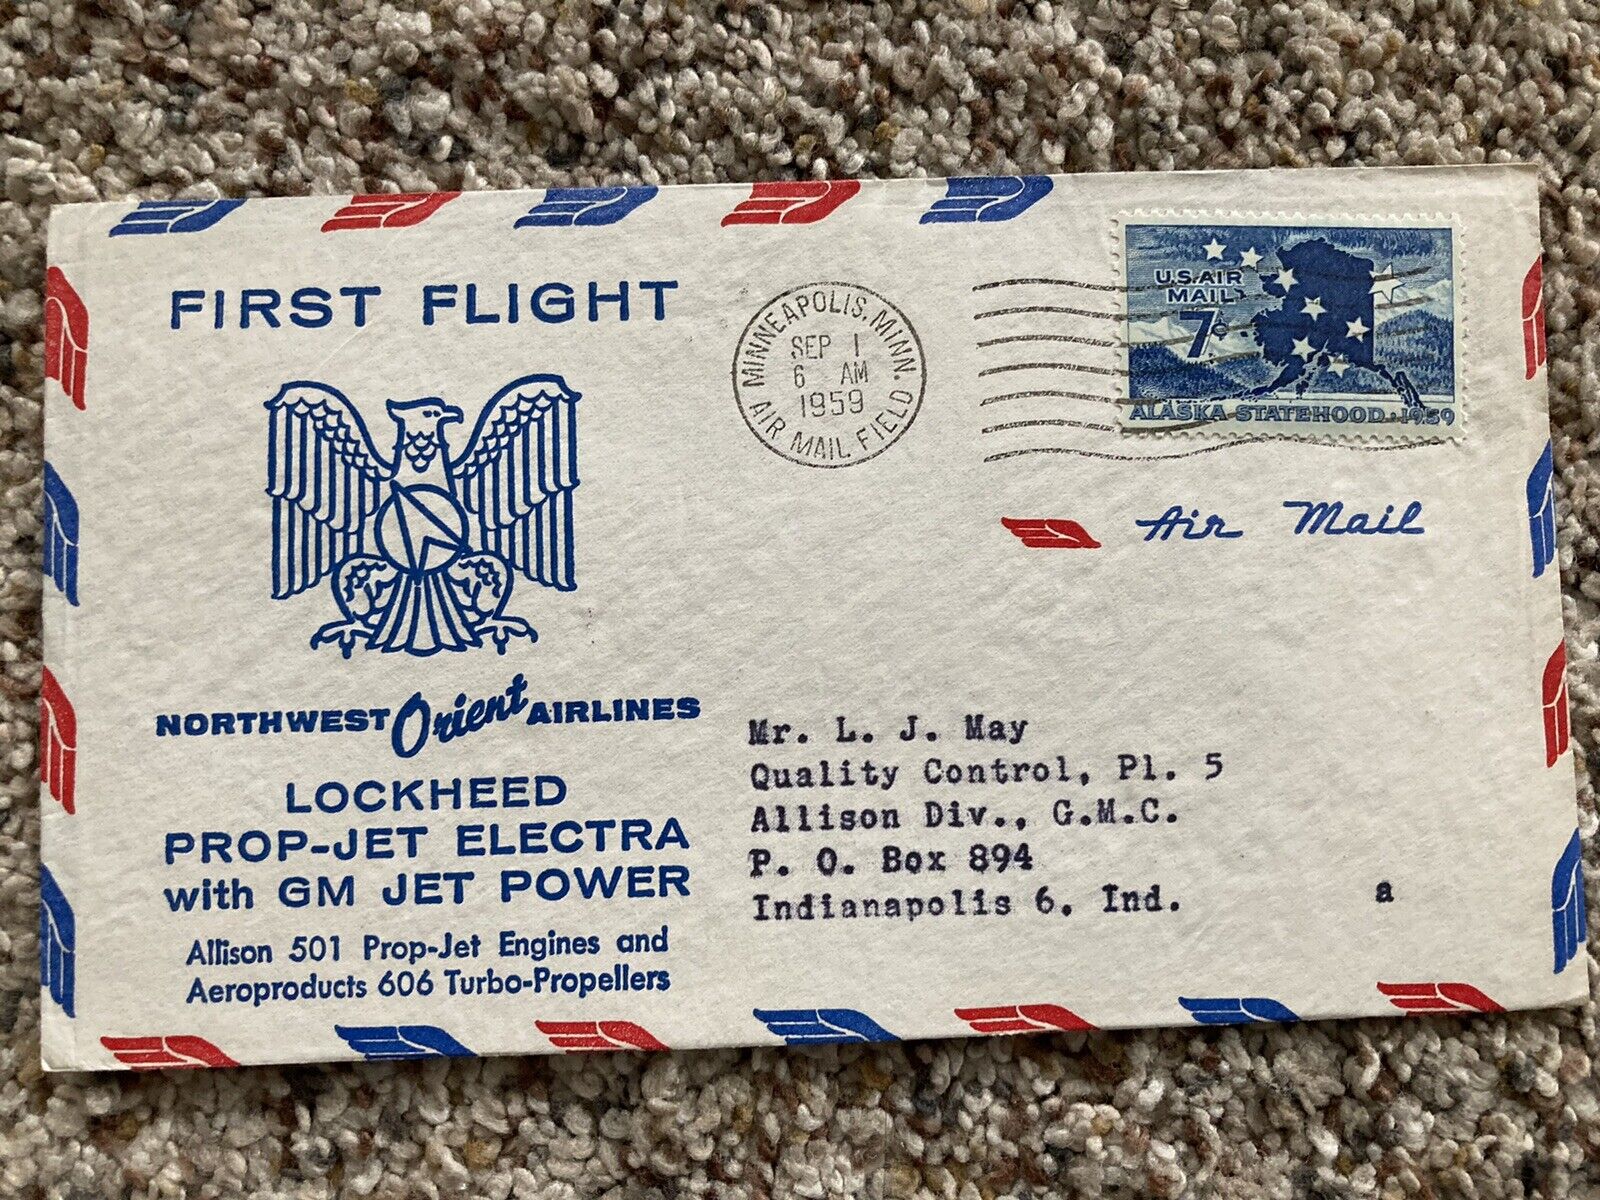 NORTHWEST ORIENT AIRLINES FIRST FLIGHT COVER 1959 Lockheed Prop-Jet Electra GM